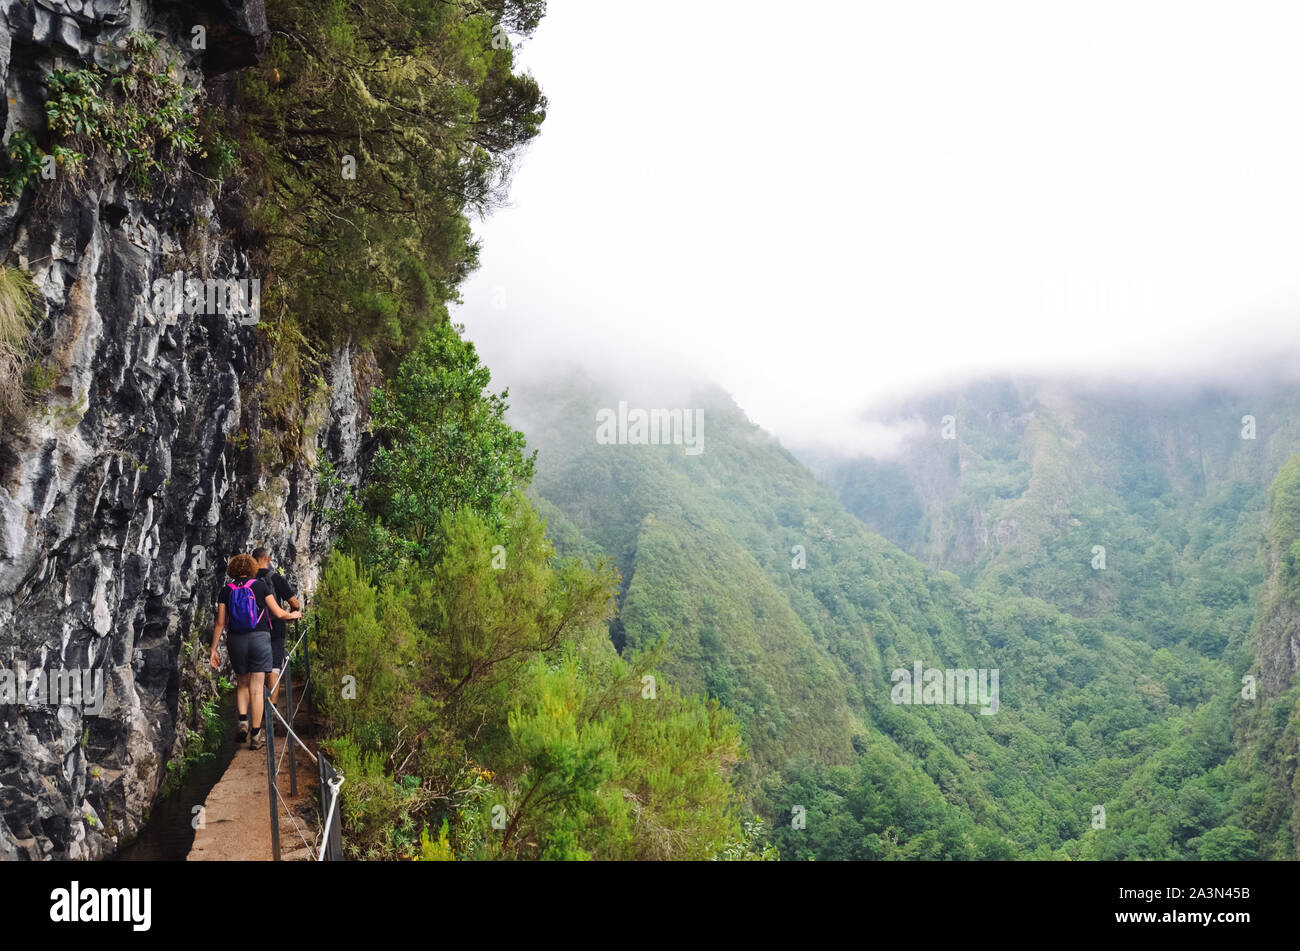 Hikers walking on a narrow path on the edge of the rock during Levada do Caldeirao Verde Trail. Misty green mountains in background. Dangerous hiking. Portuguese tourist attraction. Fog, foggy. Stock Photo